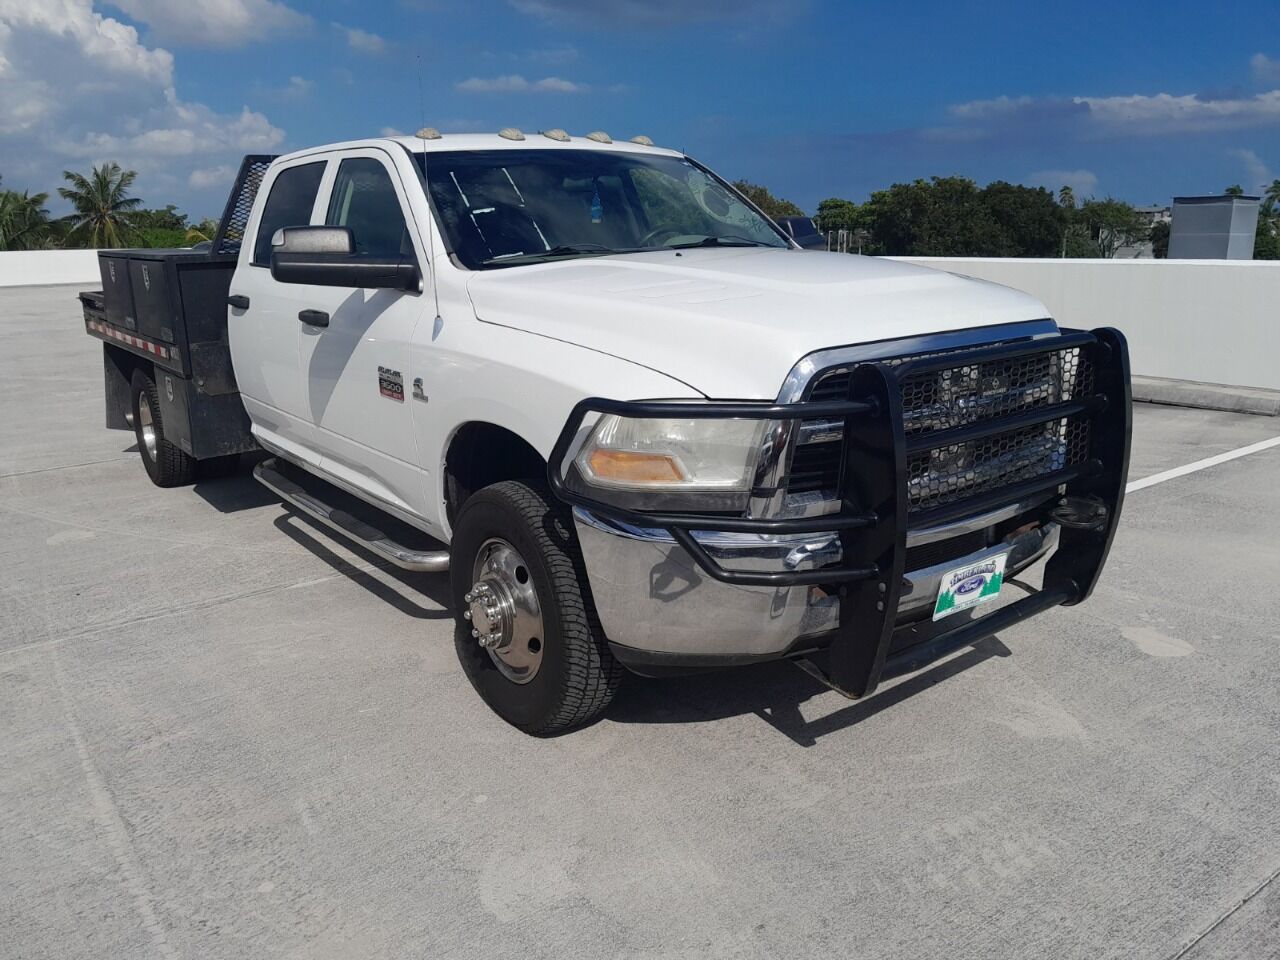 2011 DODGE Ram Chassis Cab Incomplete